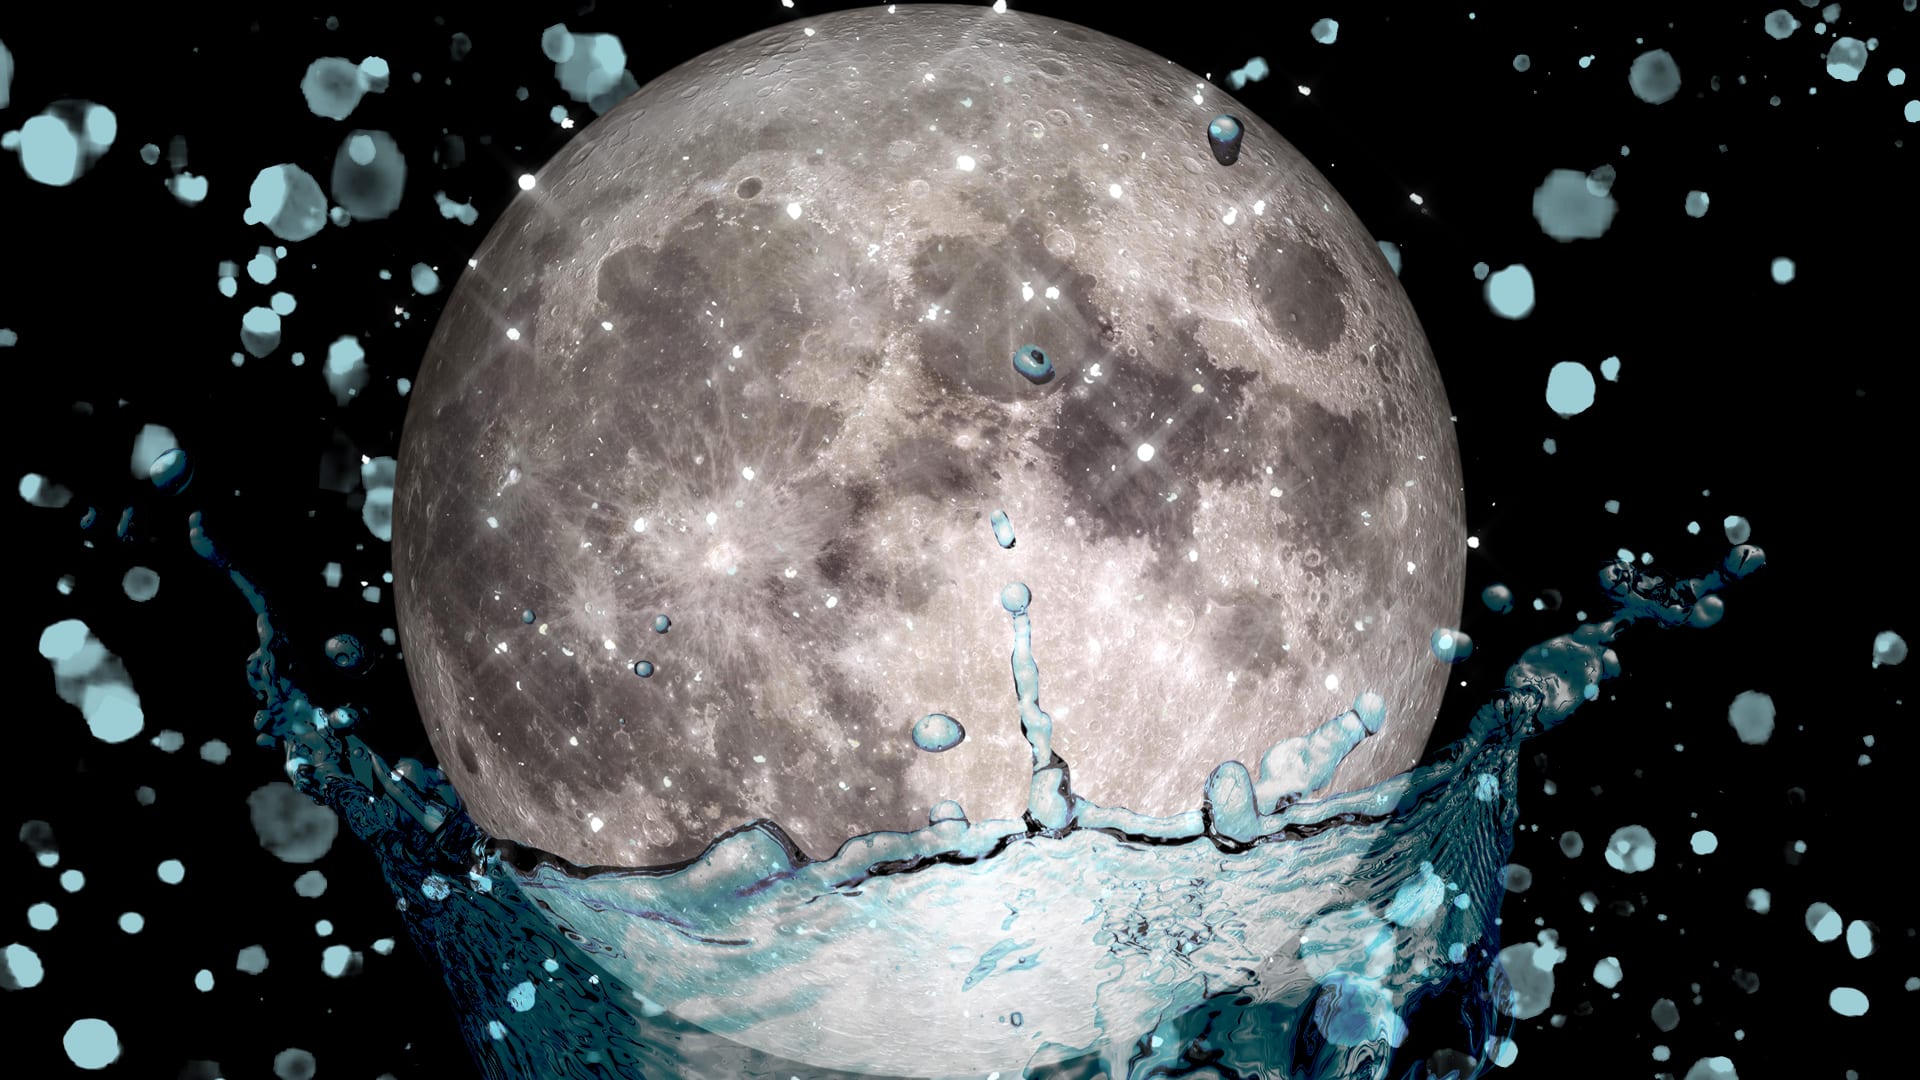 Scientists find proper H20 on the moon, ahead of a planned 2024 landing